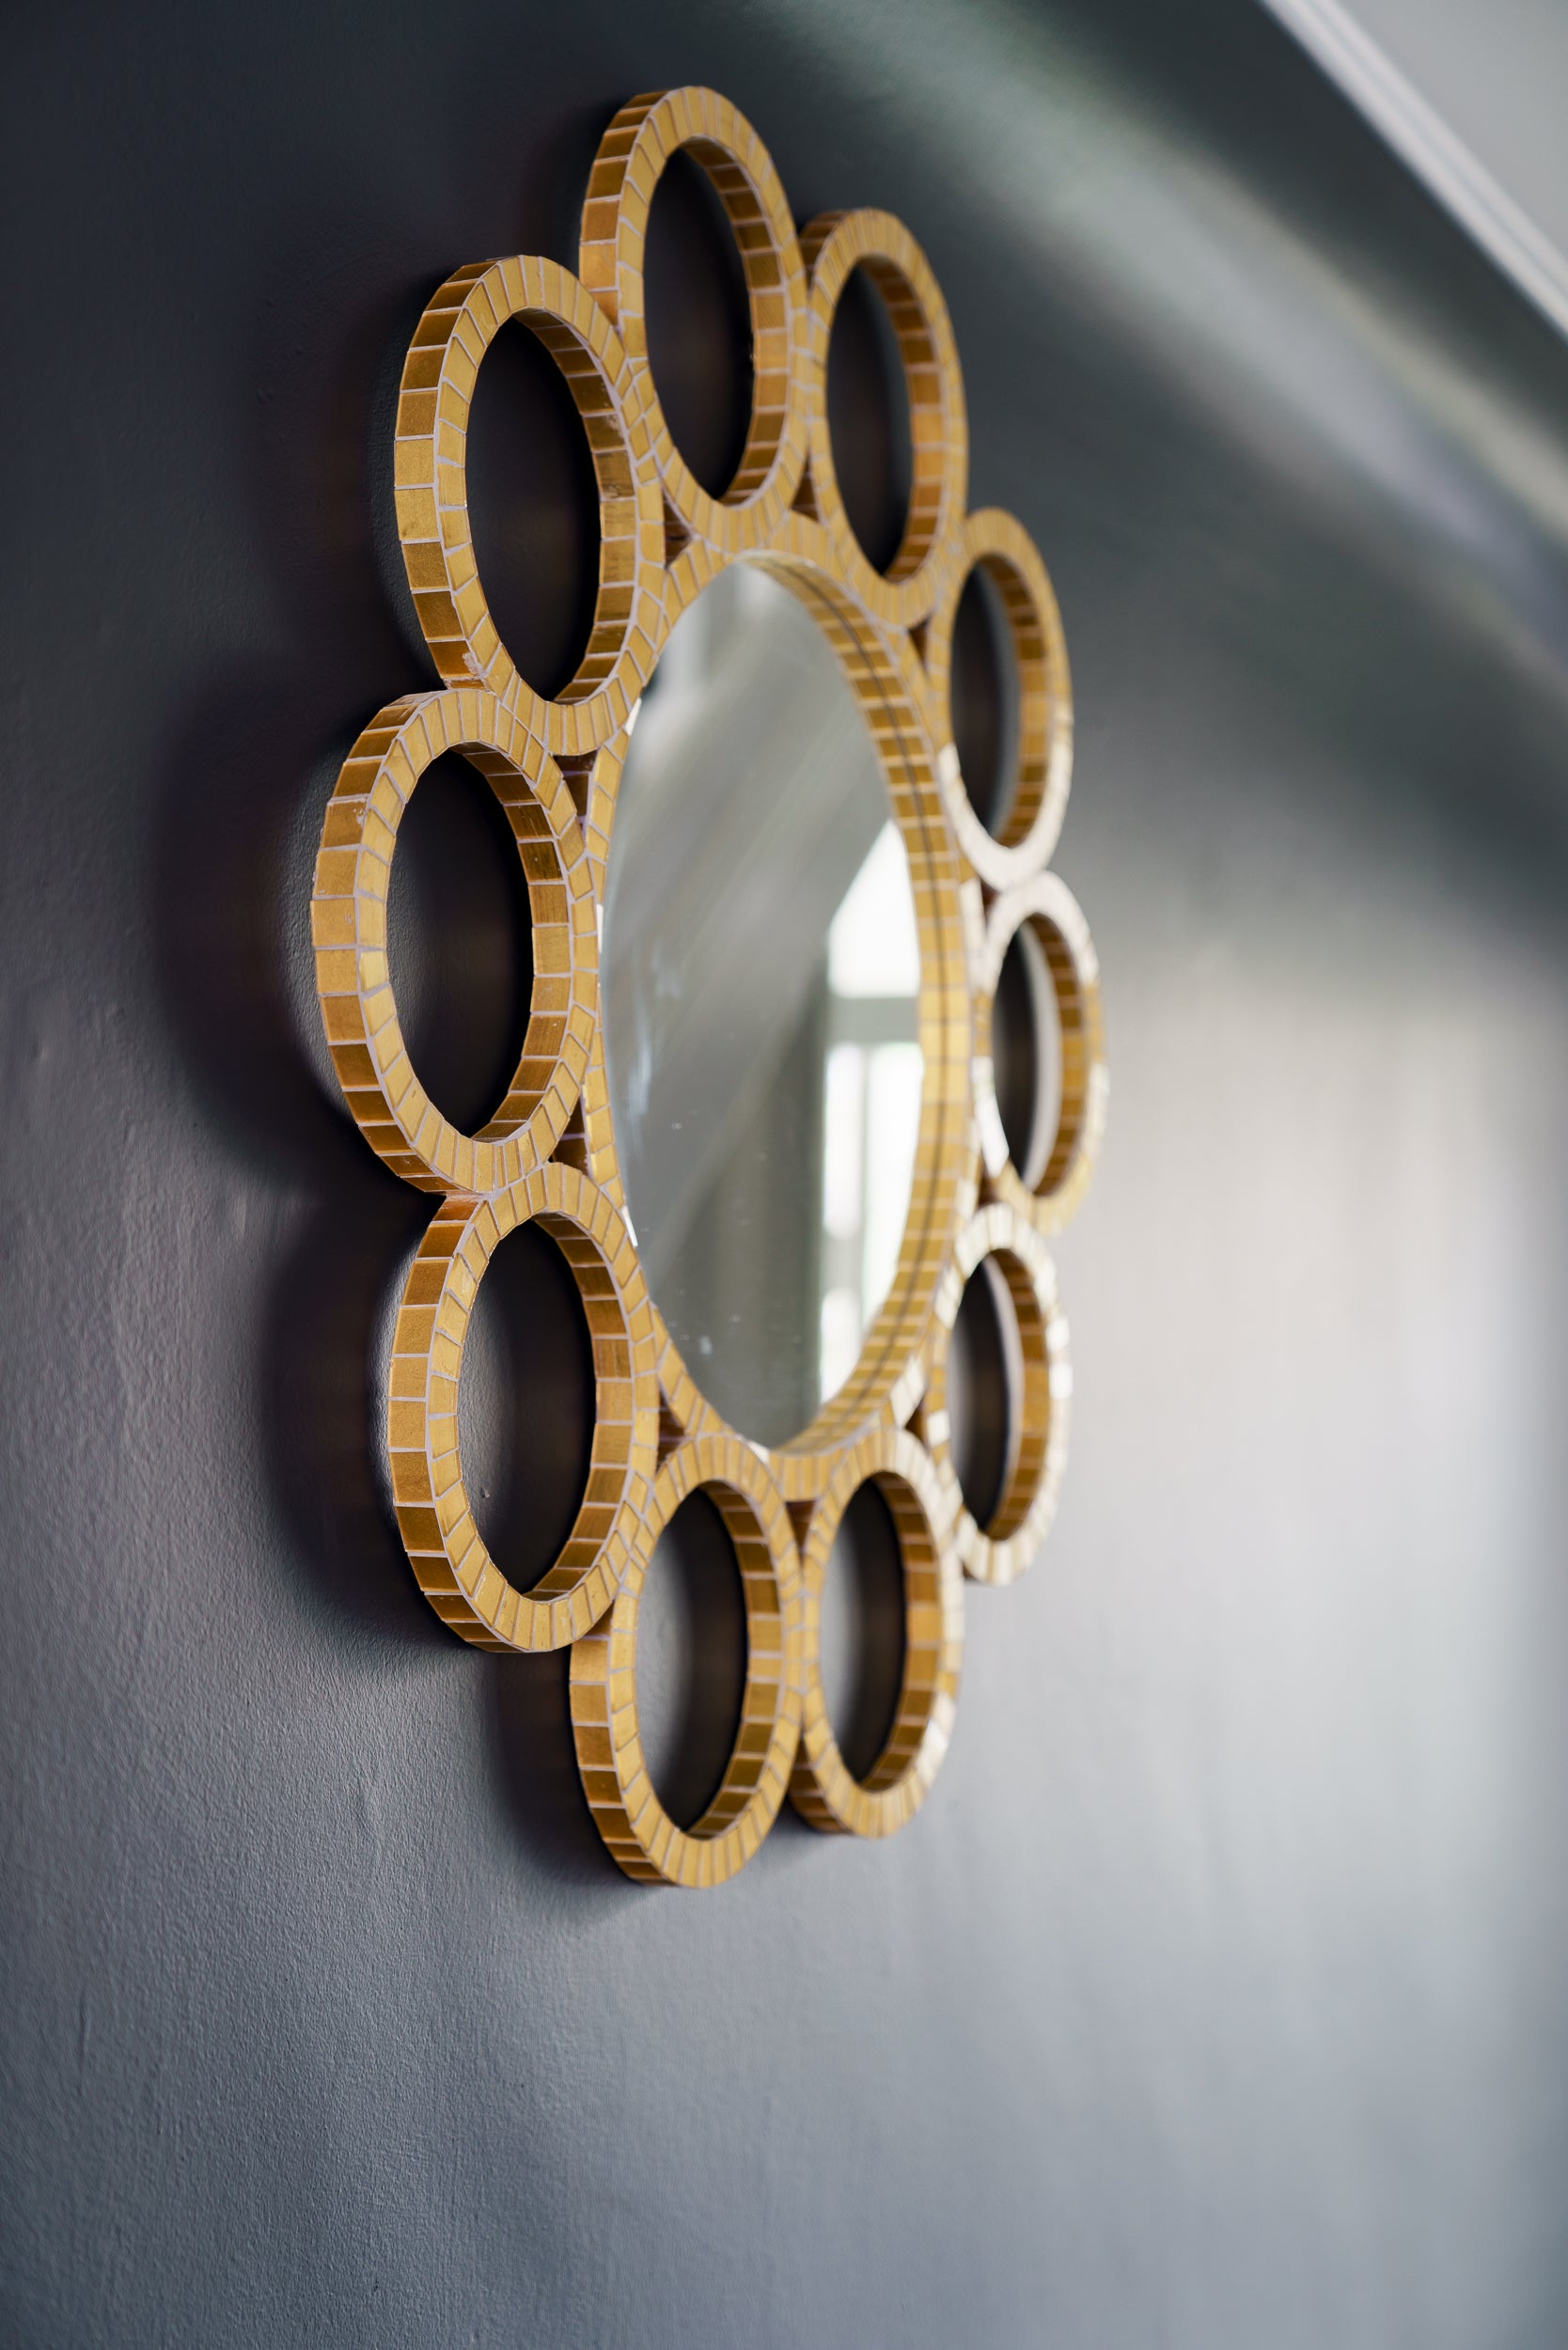 The classic contemporary Cerco Mosaic mirror is handmade in the UK by Claire Nayman. Shown here in the gold finish: 23.5 carat gold leaf hand gilded glass, other finishes are available including copper leaf hand gilded glass or silver finish hand